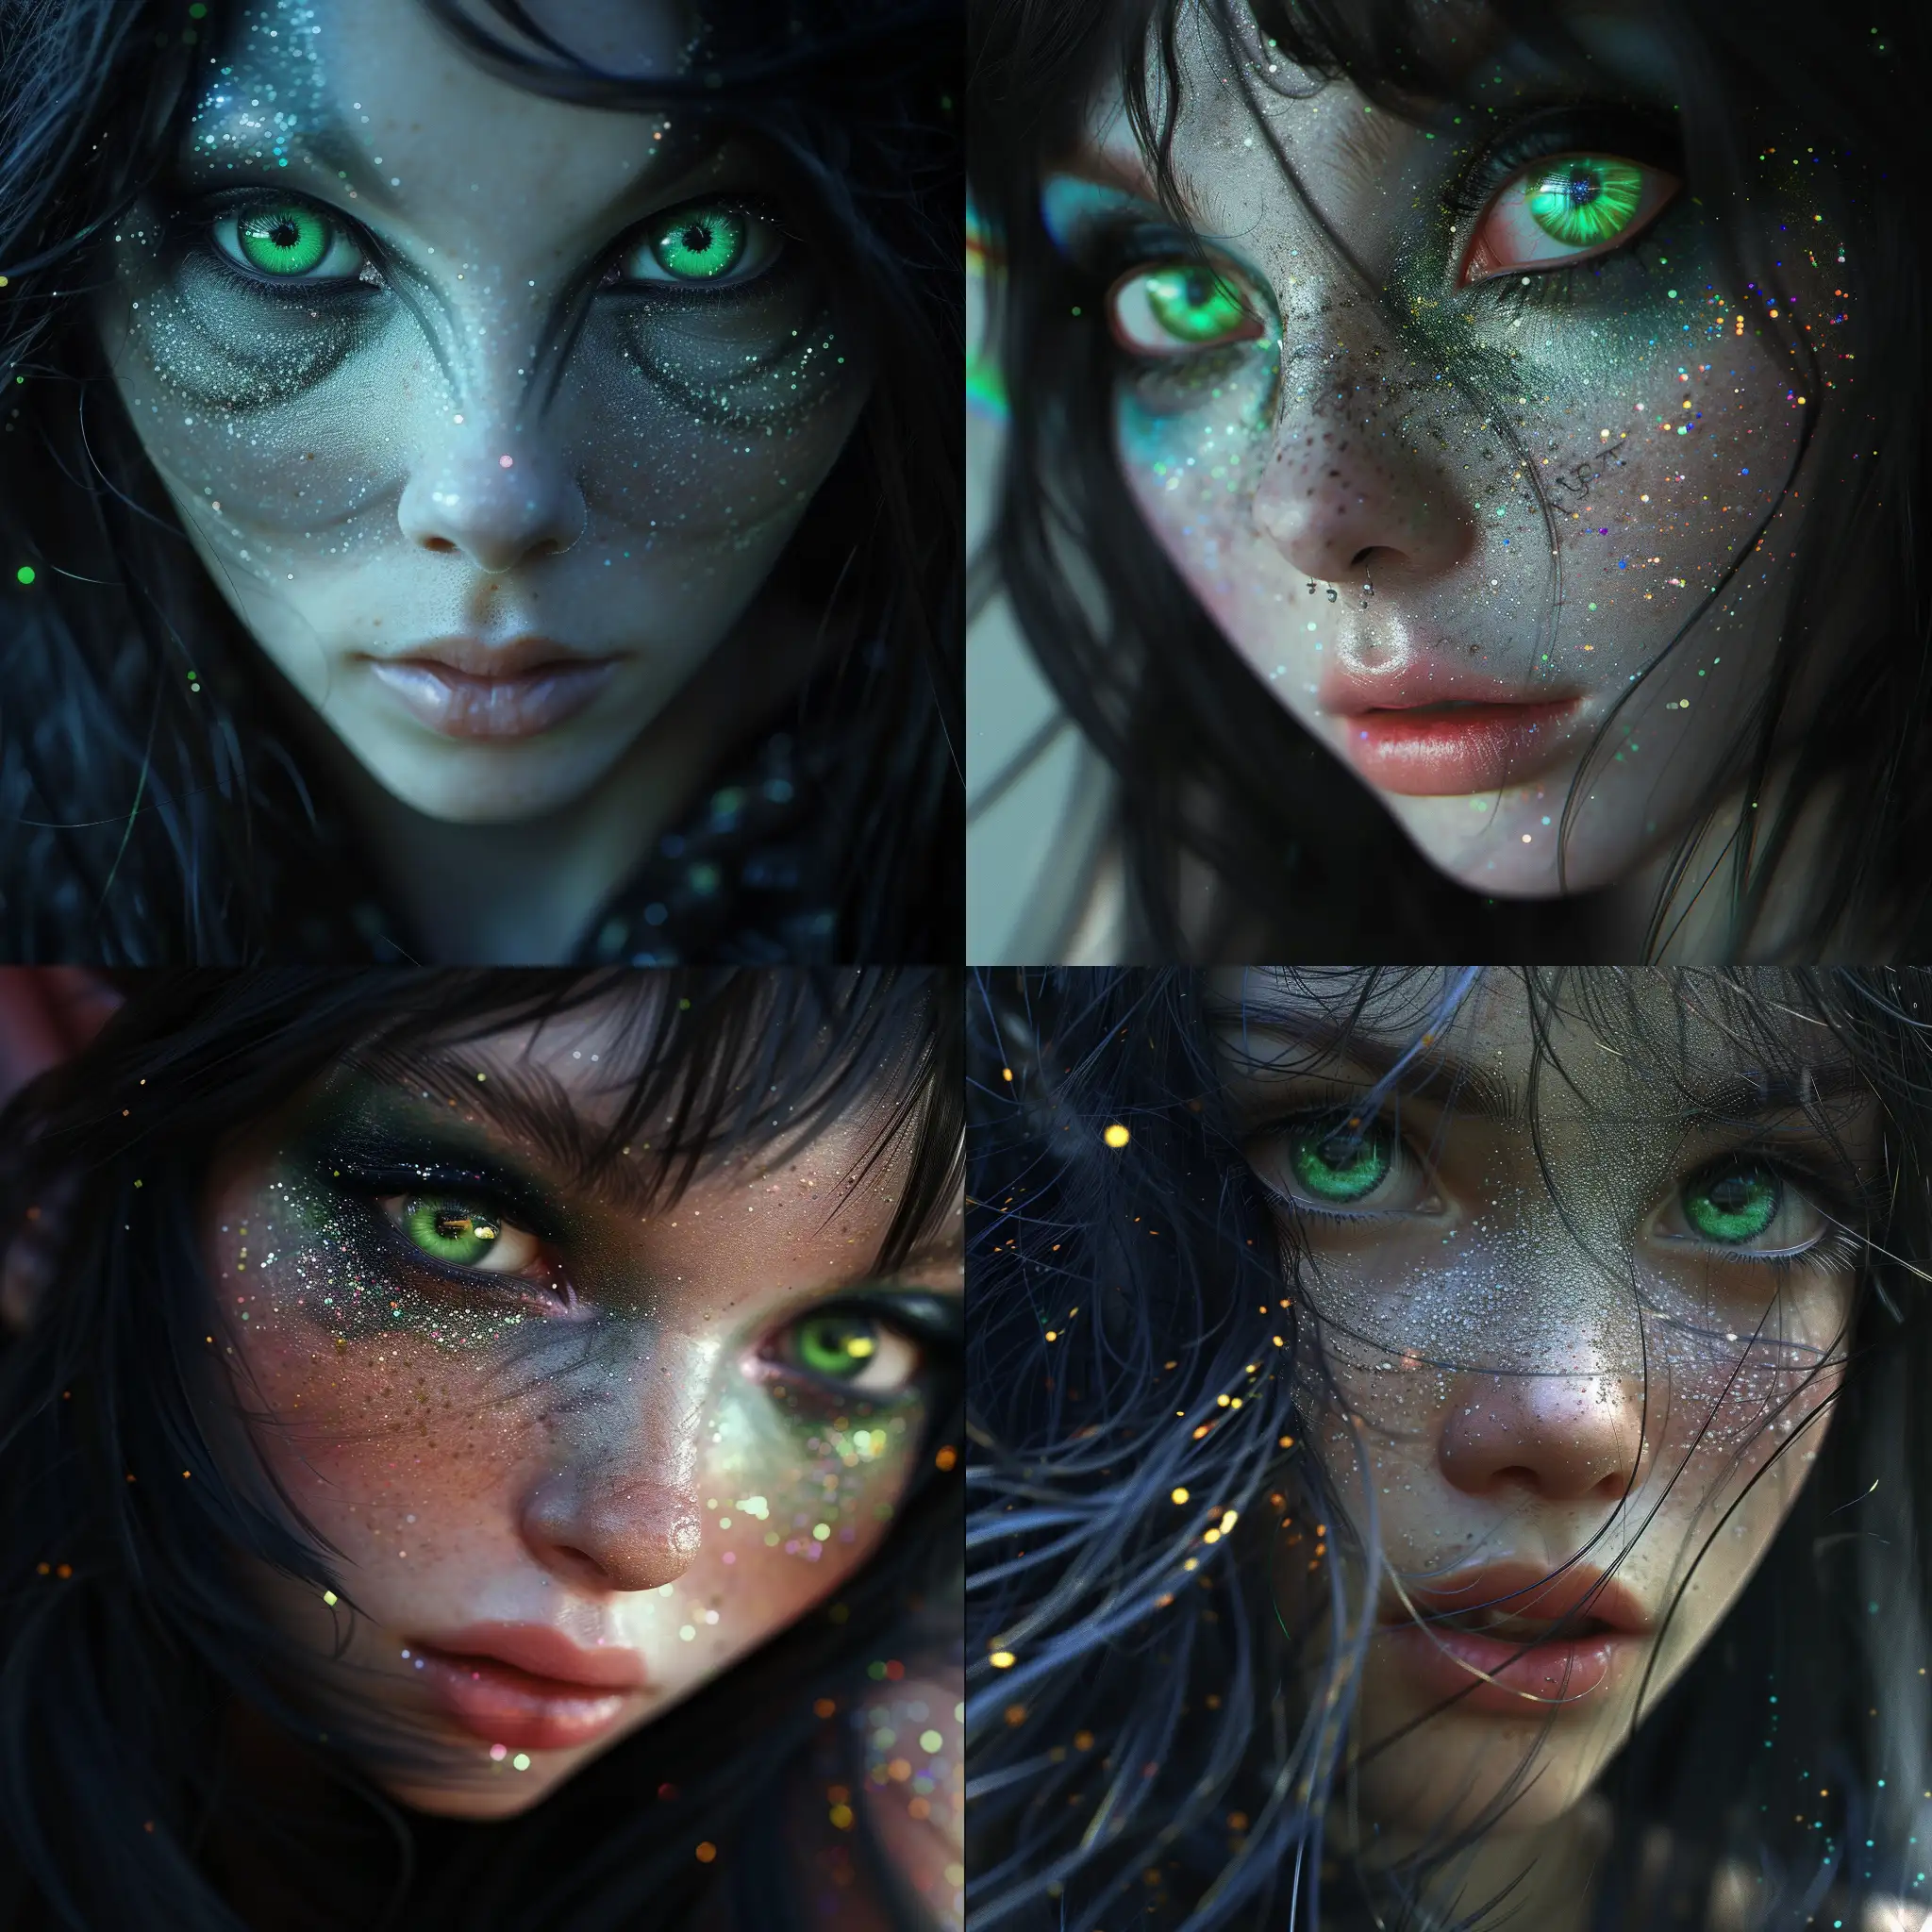 Realistic-Alien-Elven-Girl-Portrait-with-Black-Hair-and-Glitter